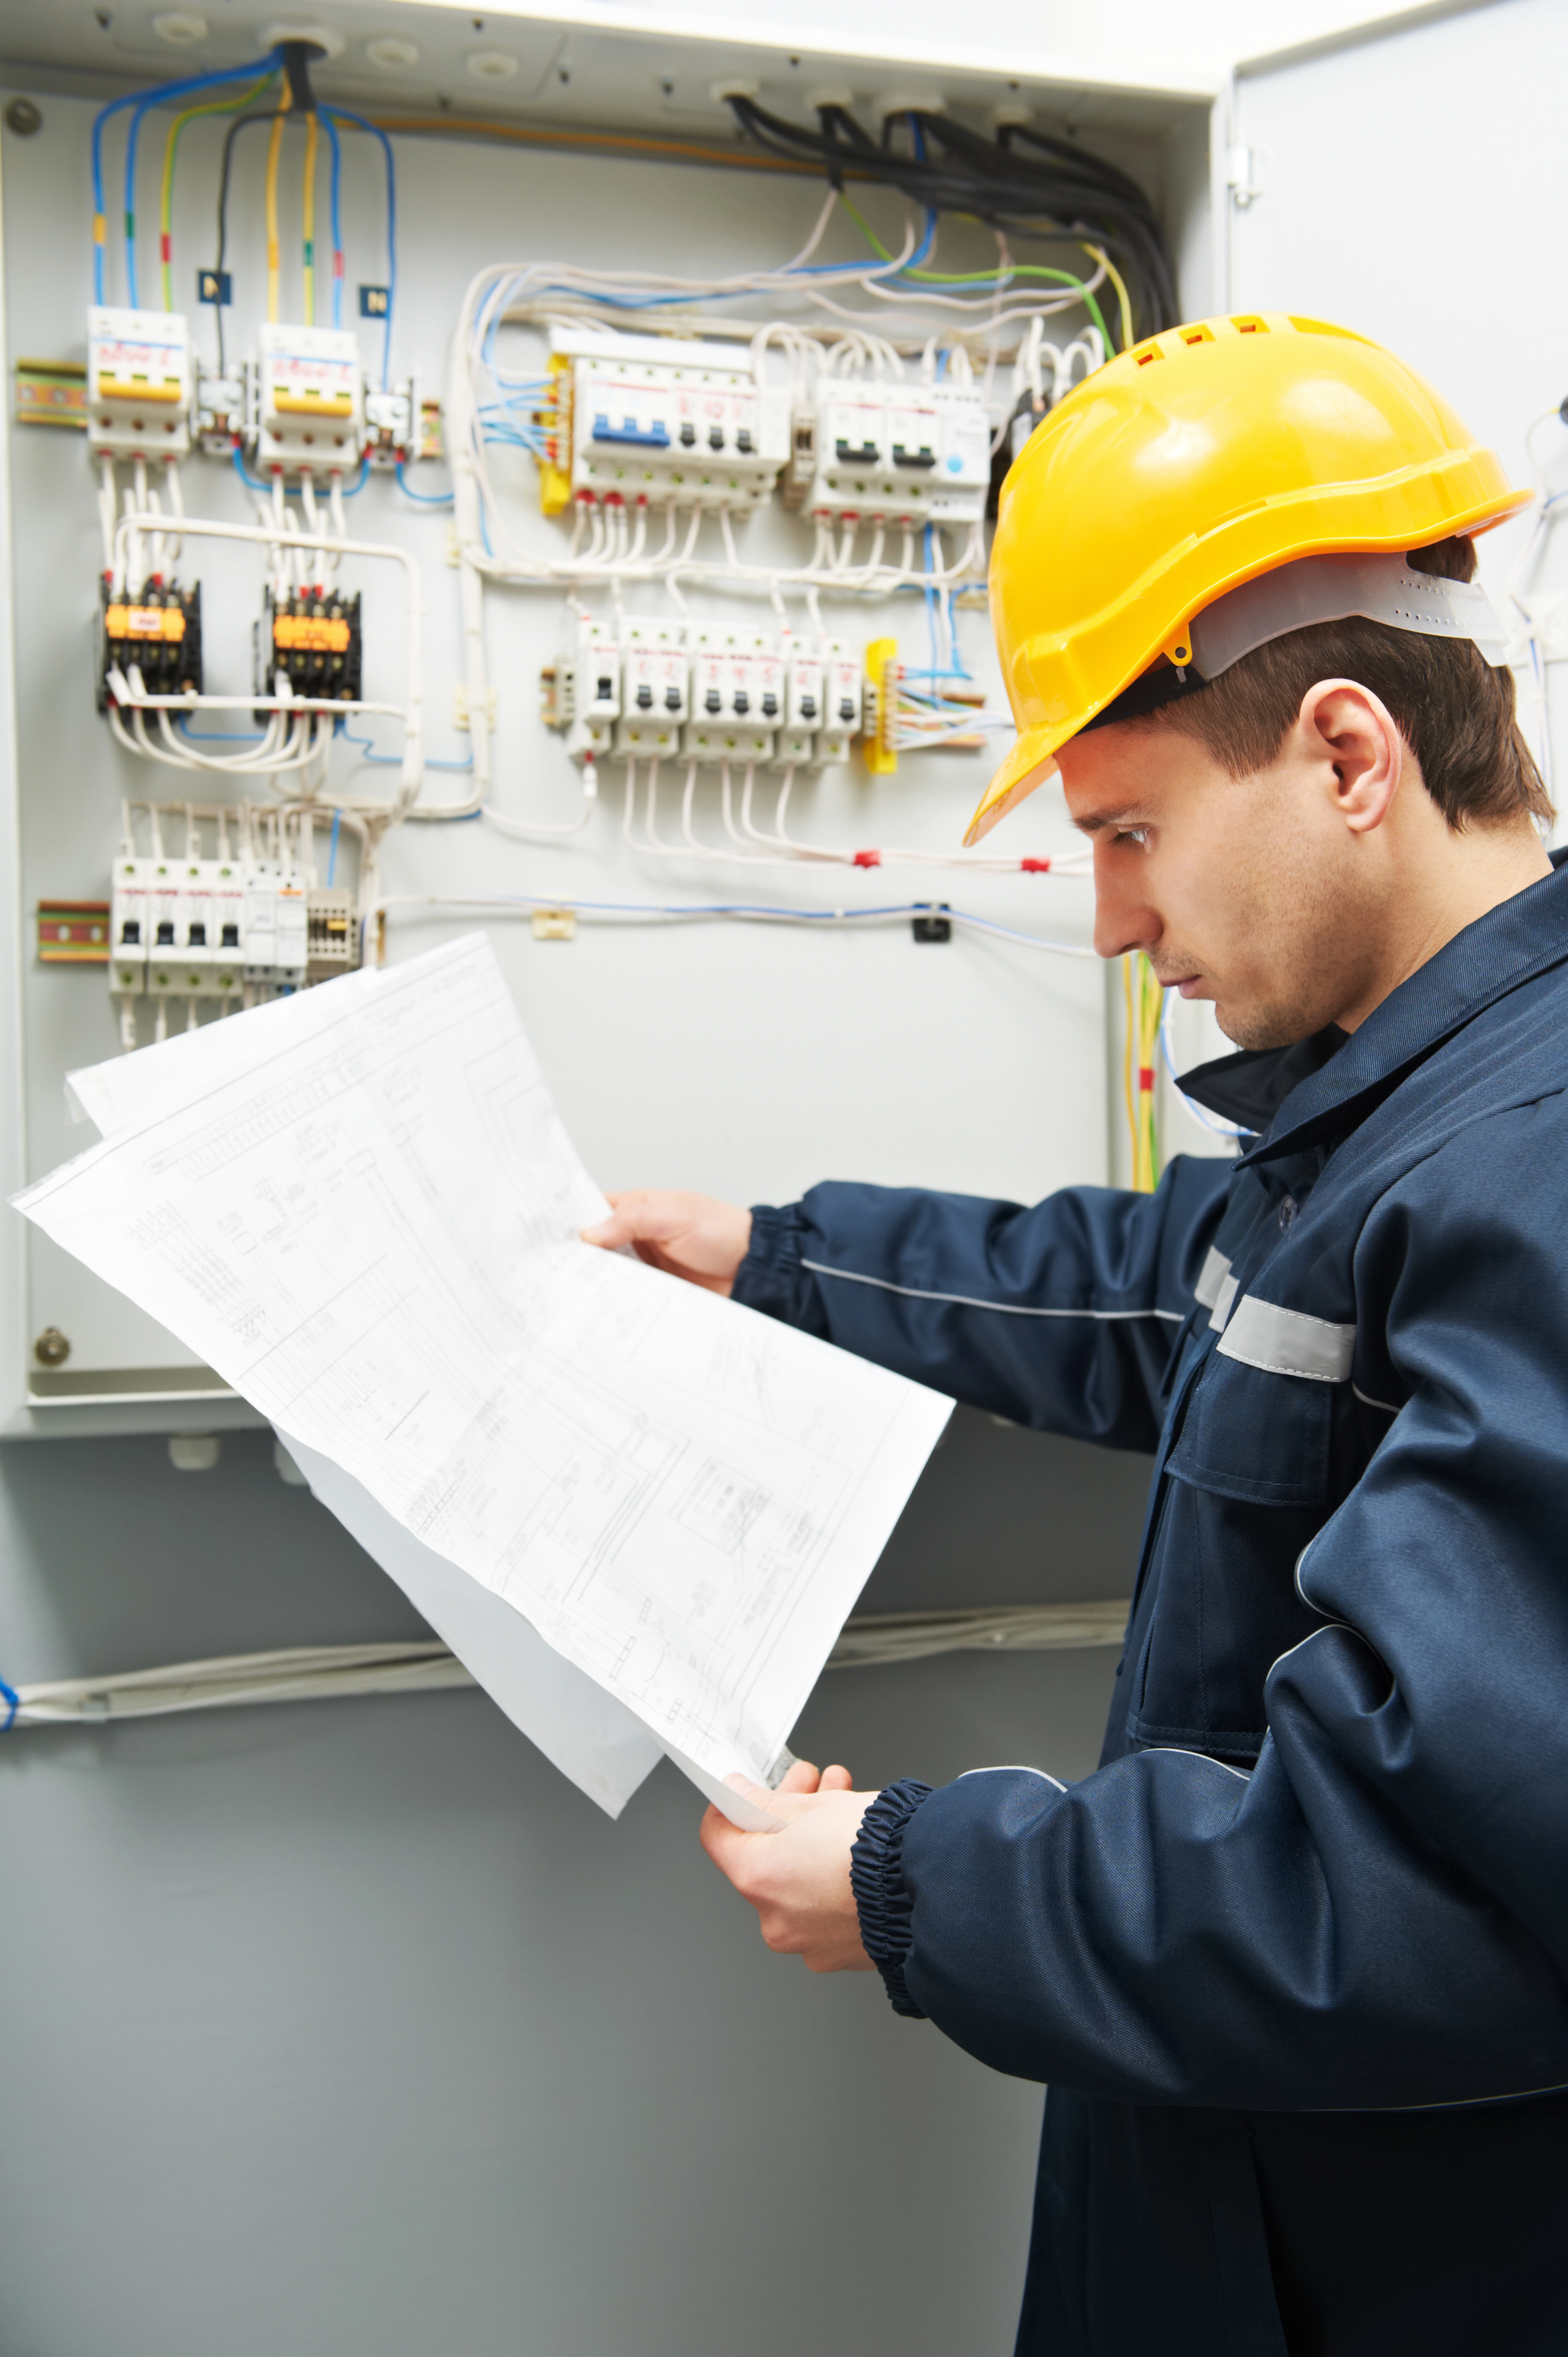 Engineer in jacket and yellow hard hat standing by an electrical board looking over paperwork